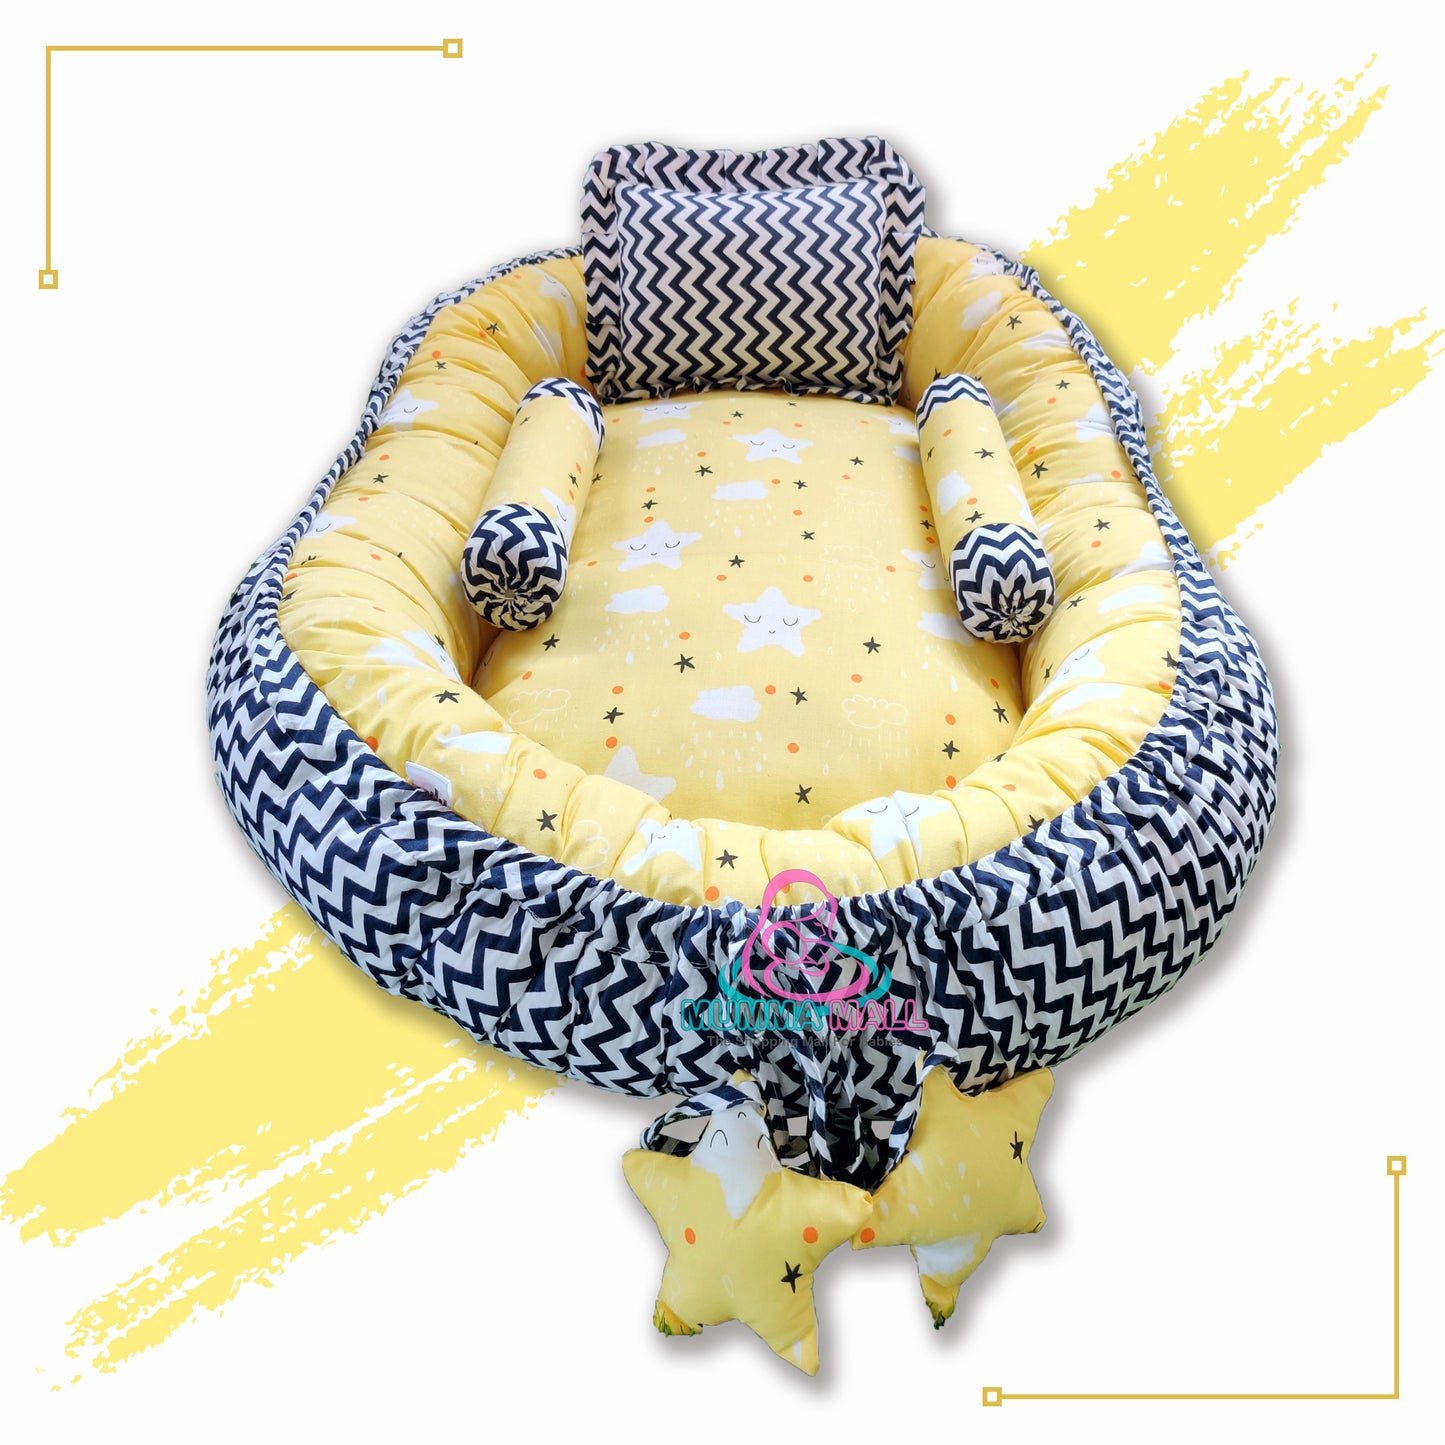 Baby nest bedding with blanket and set of 3 pillows as neck support, side support and toy (Yellow and Black)